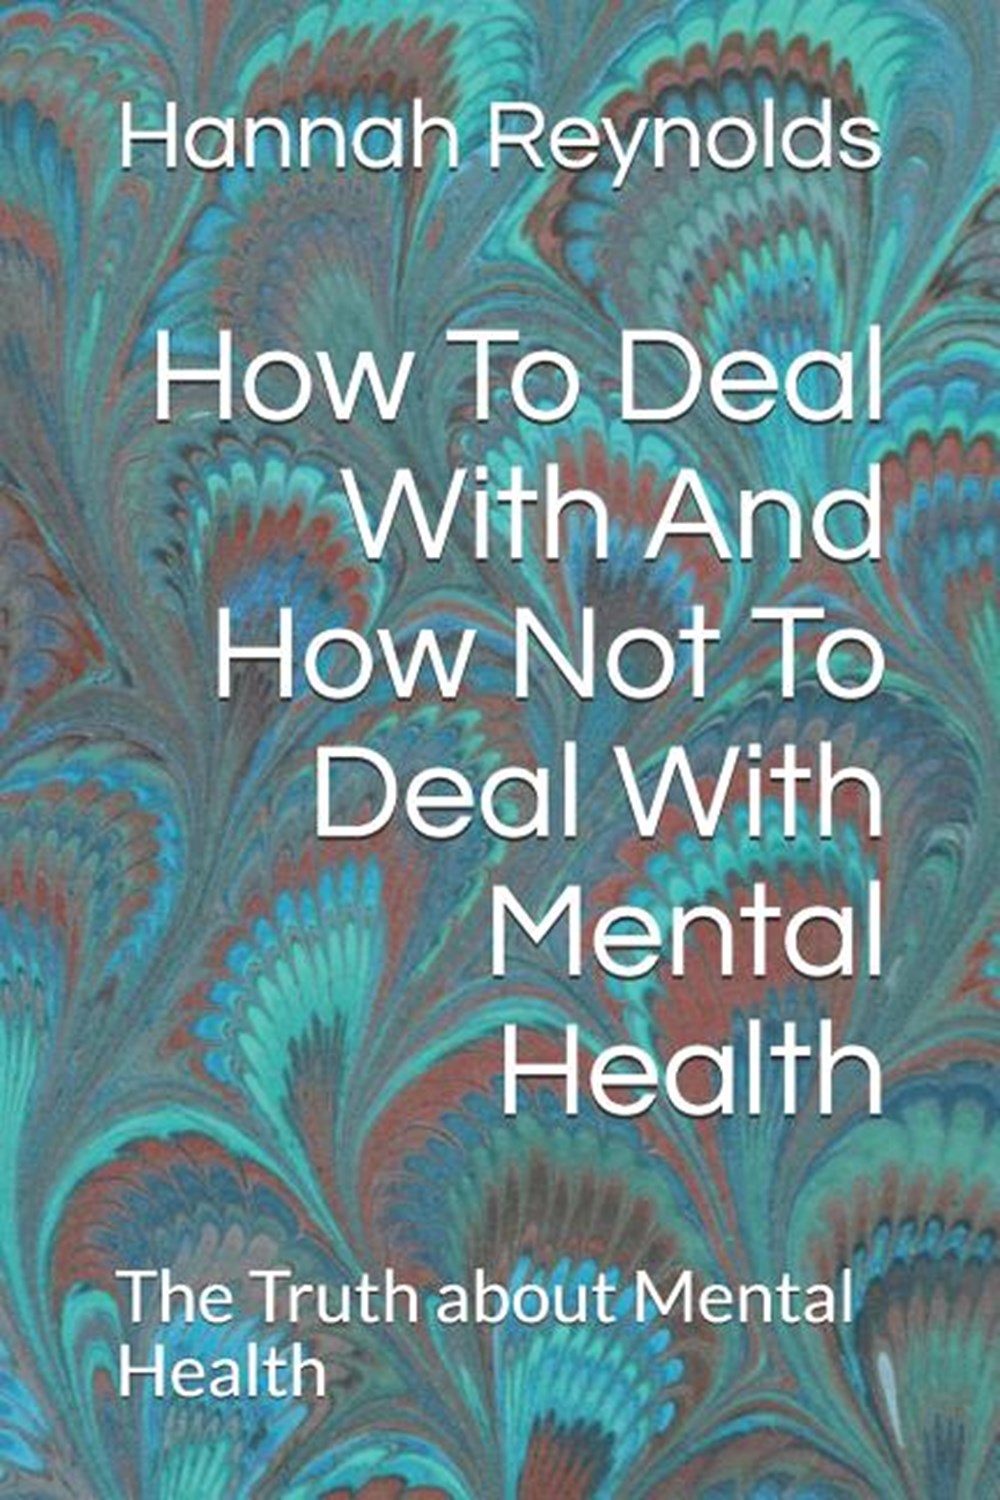 How to deal with and how not to deal with Mental Health